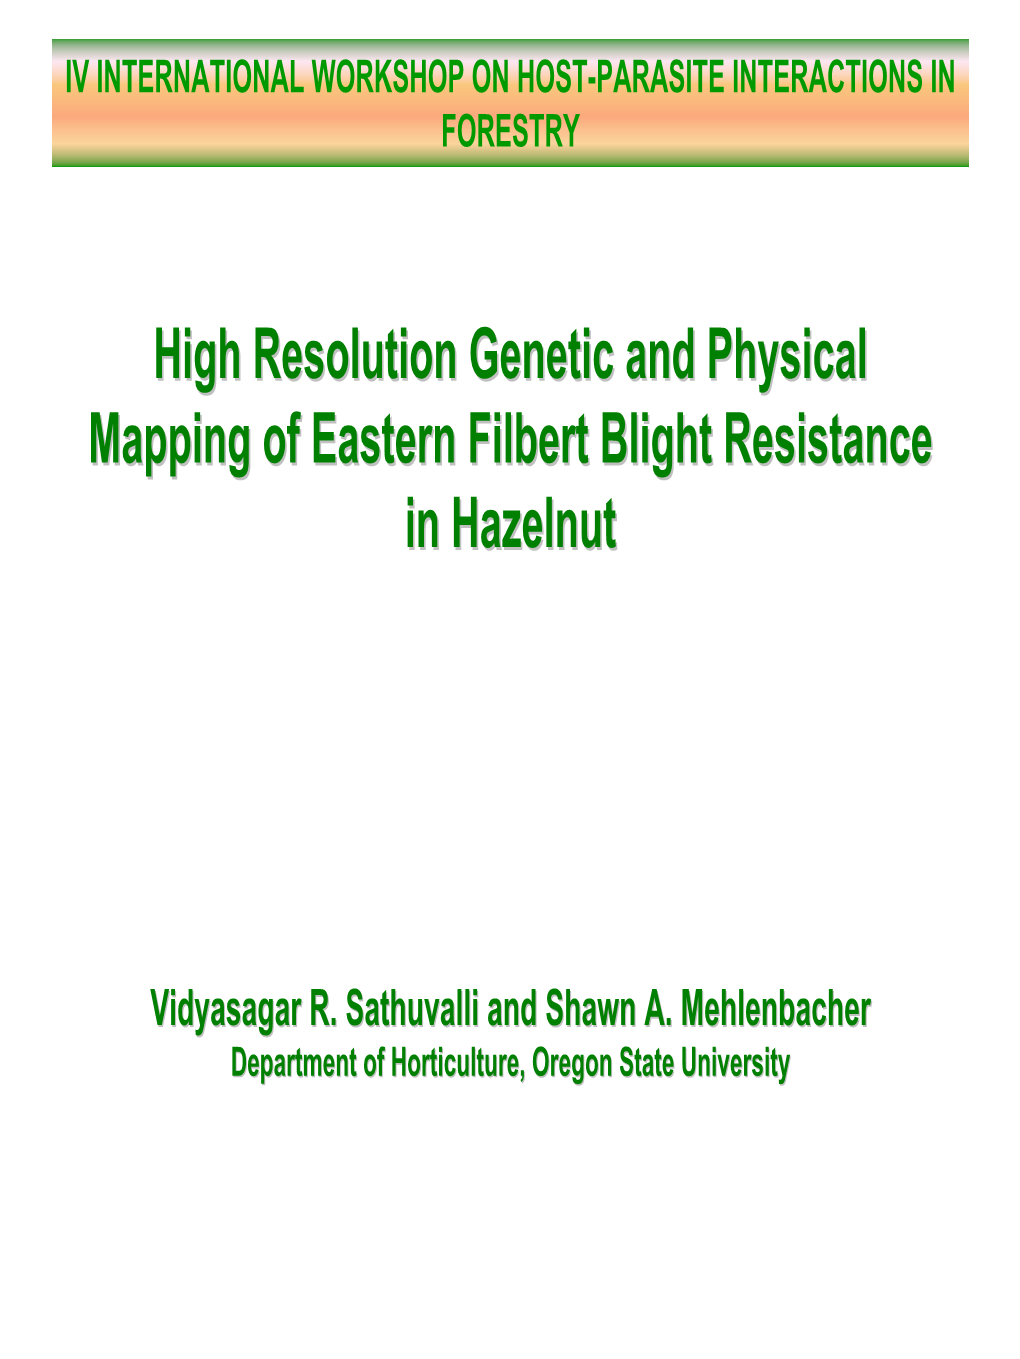 High Resolution Genetic and Physical Mapping of Eastern Filbert Blight